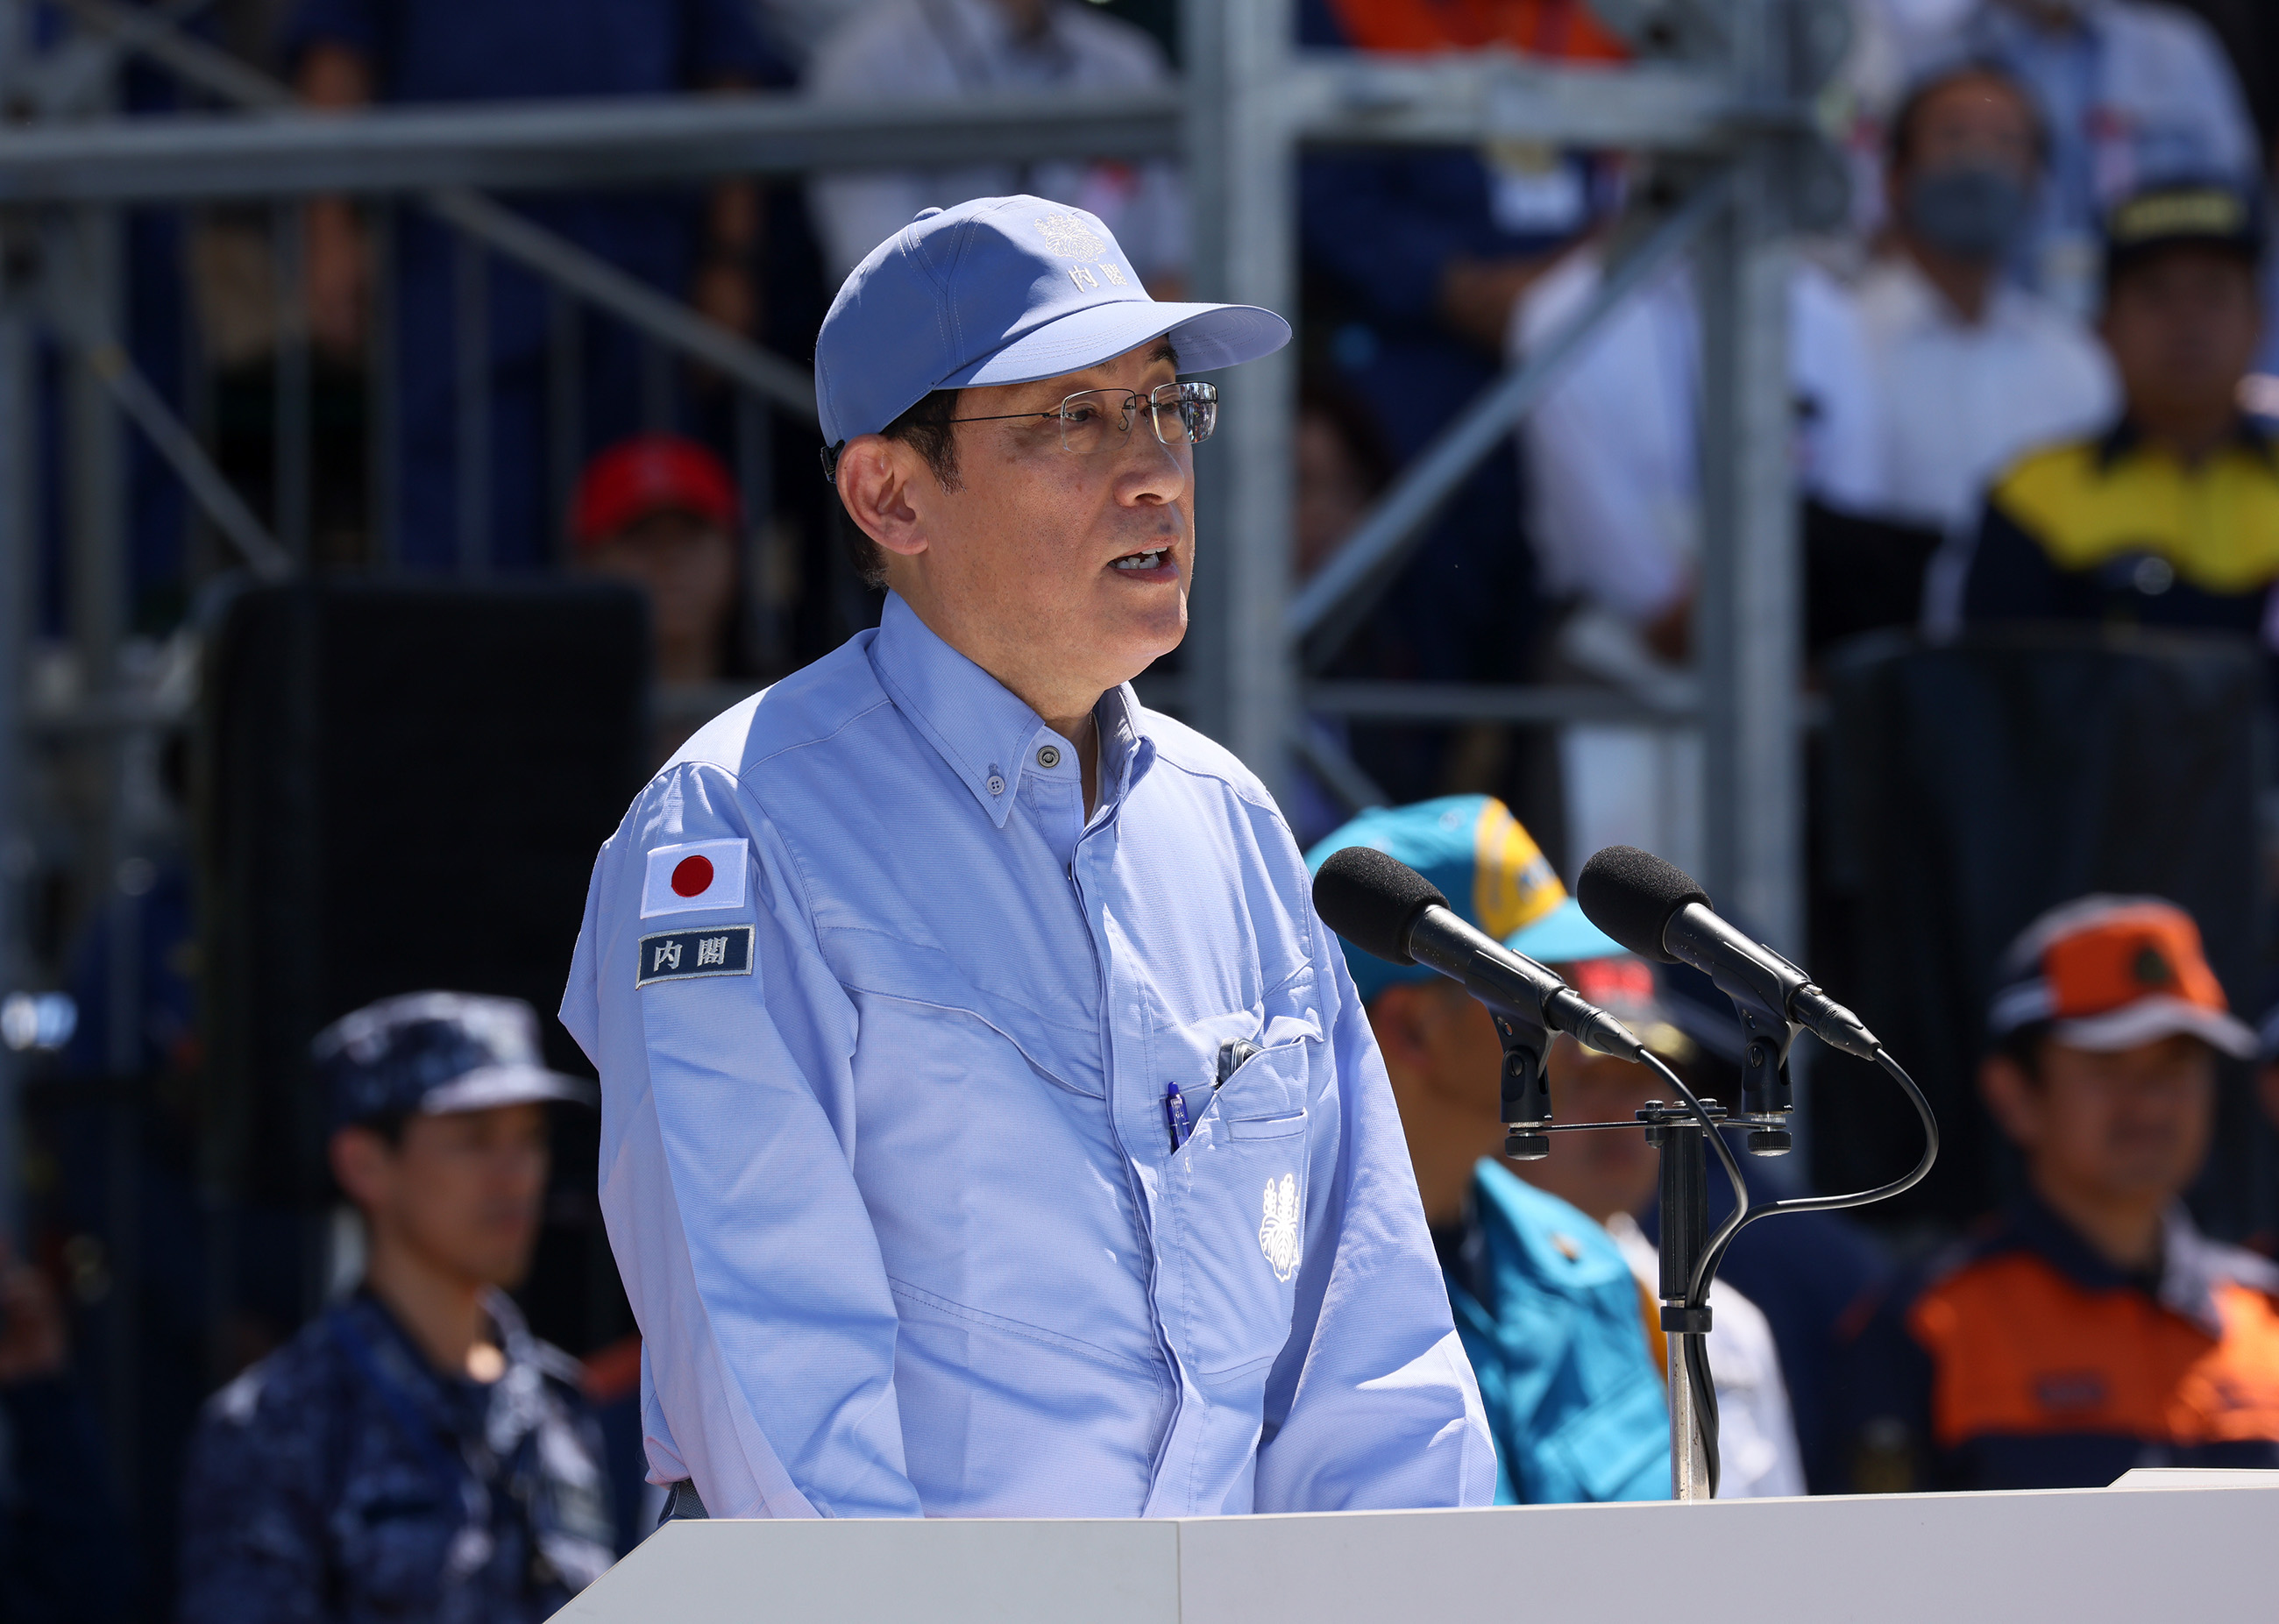 Prime Minister Kishida delivering an address during the joint disaster management drills by nine local governments in the Kanto region (1)